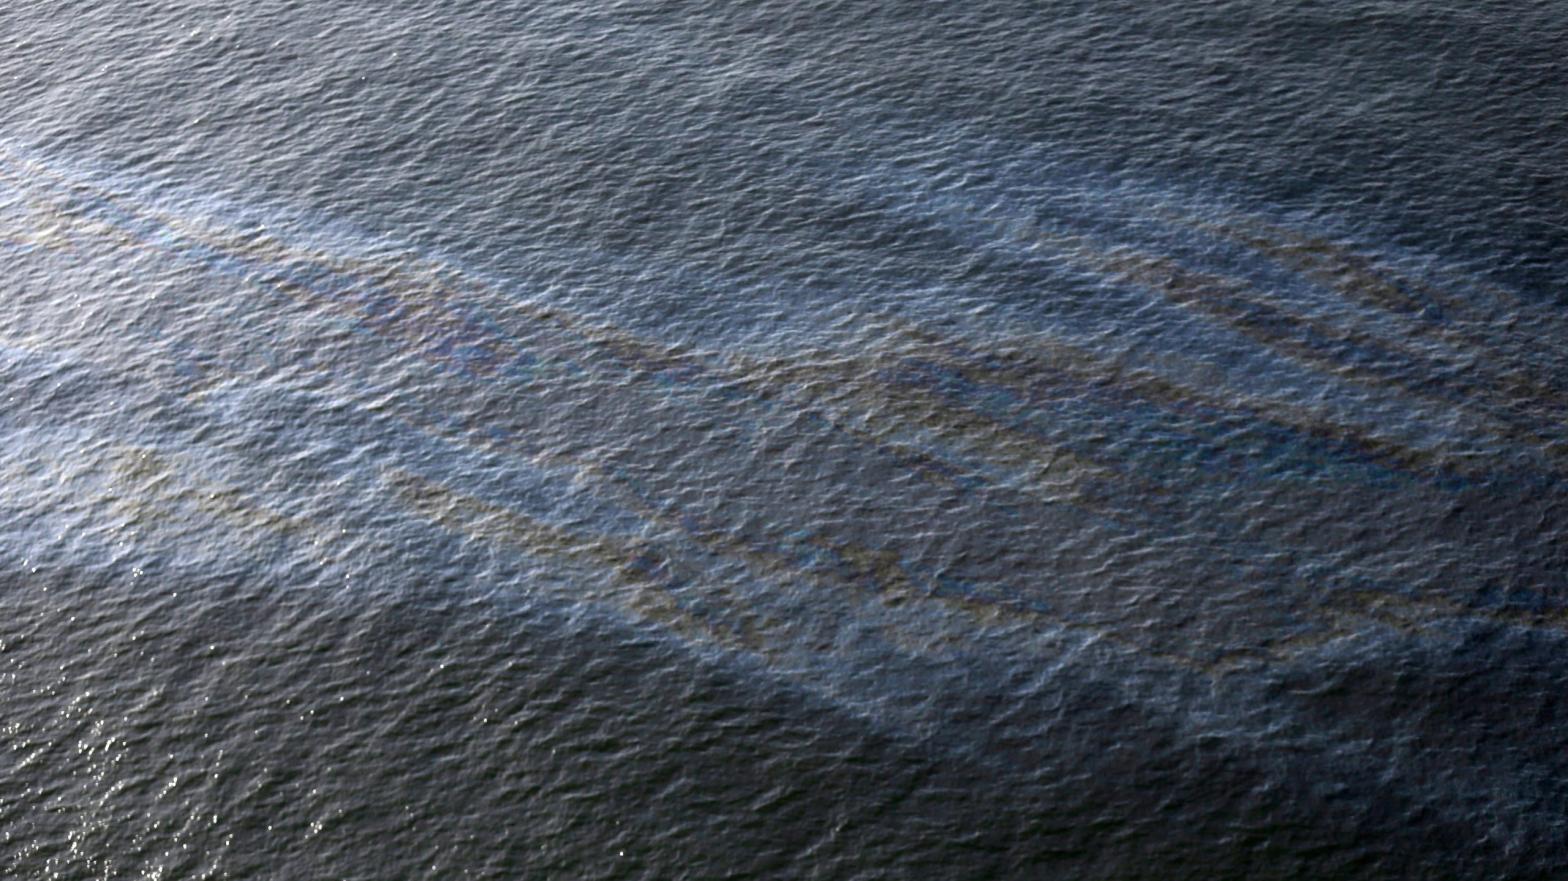 An oil sheen drifting from the site of the former Taylor Energy oil rig in the Gulf of Mexico, off the coast of Louisiana. (Photo: Gerald Herbert, AP)